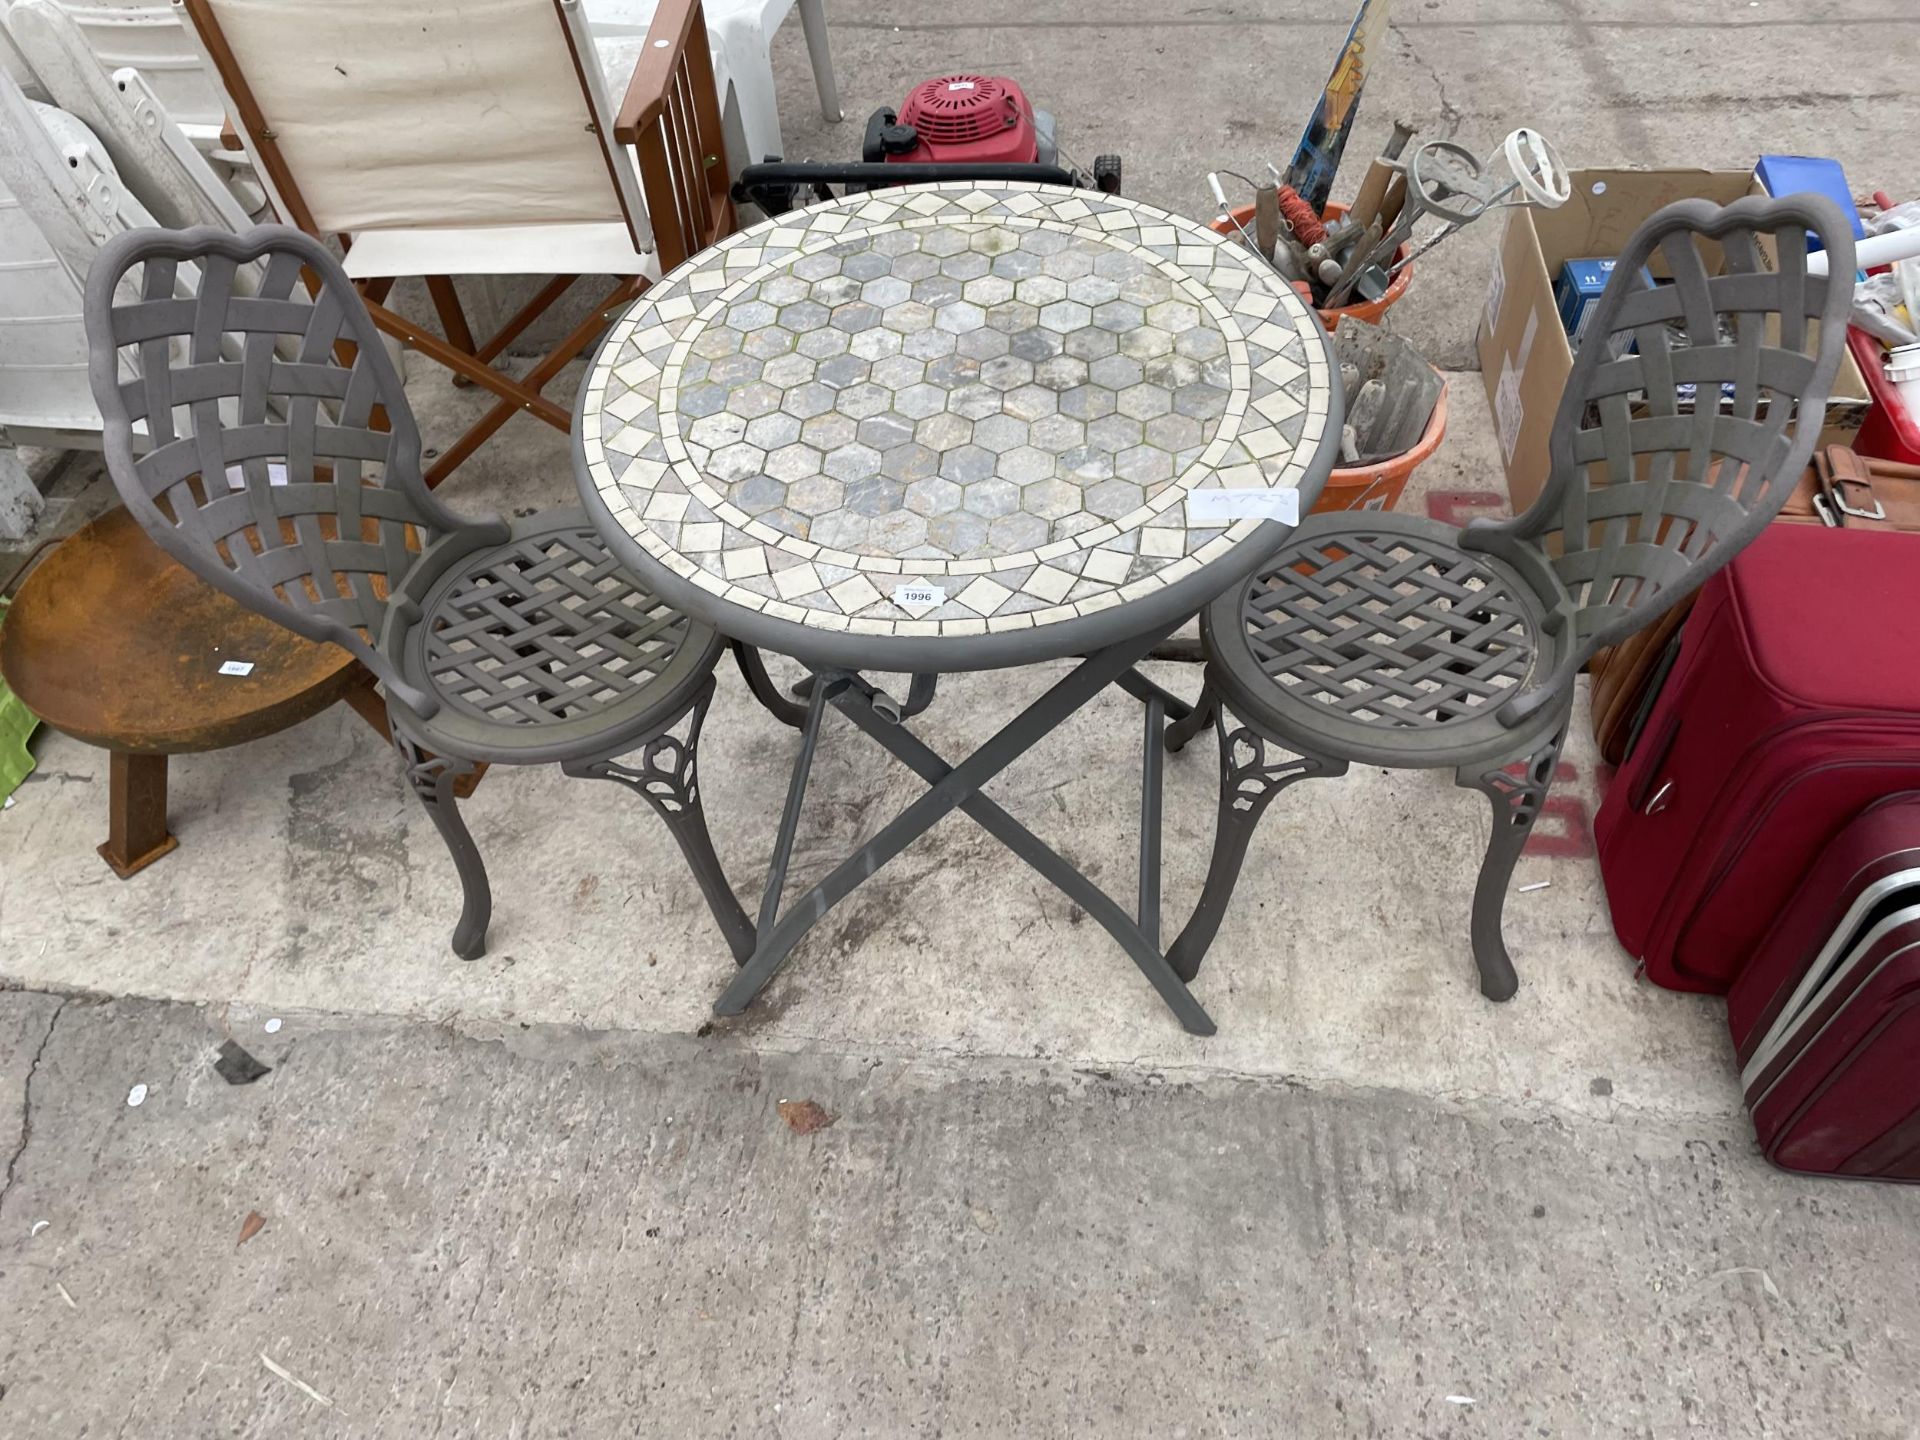 A METAL BISTRO SET COMPRISNG OF TWO CHAIRS AND A TILE TOP TABLE